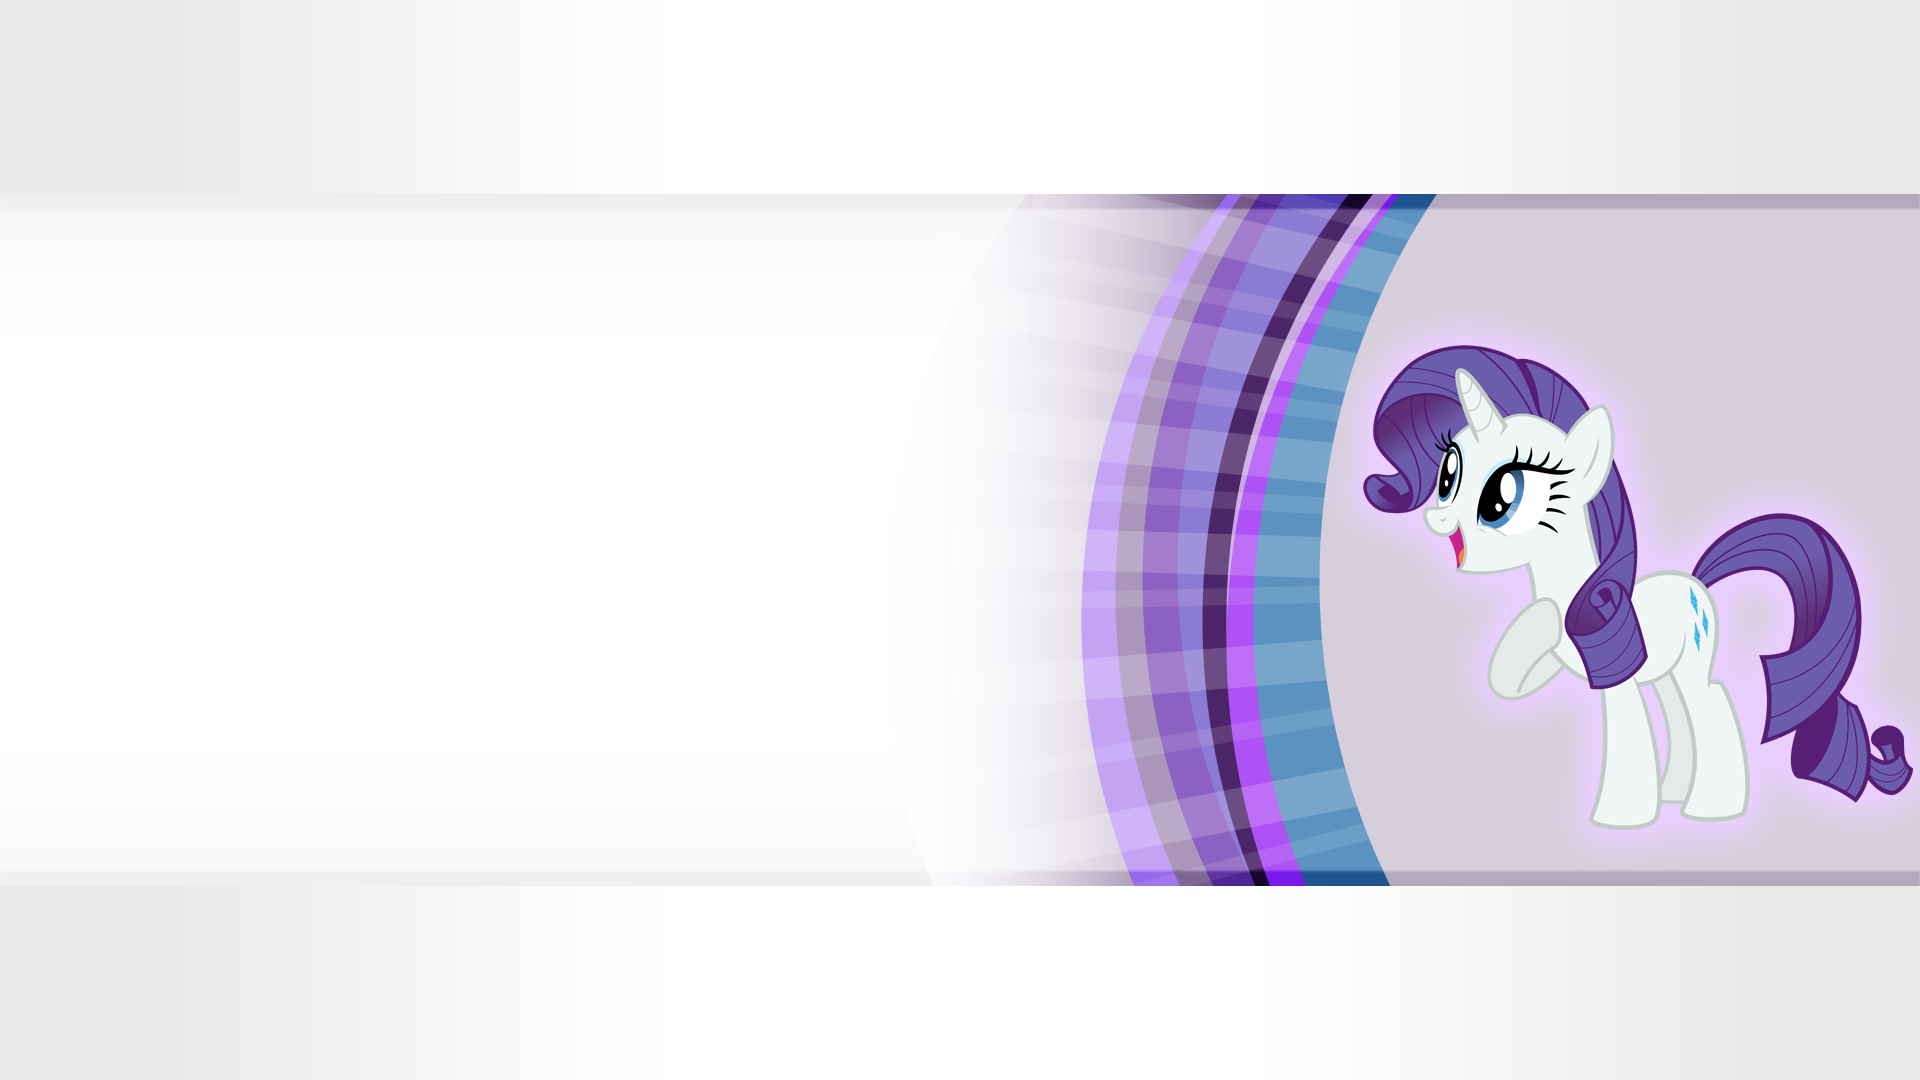 Wallpaper - Rarity is Best Poni by nickman983 and Vetali